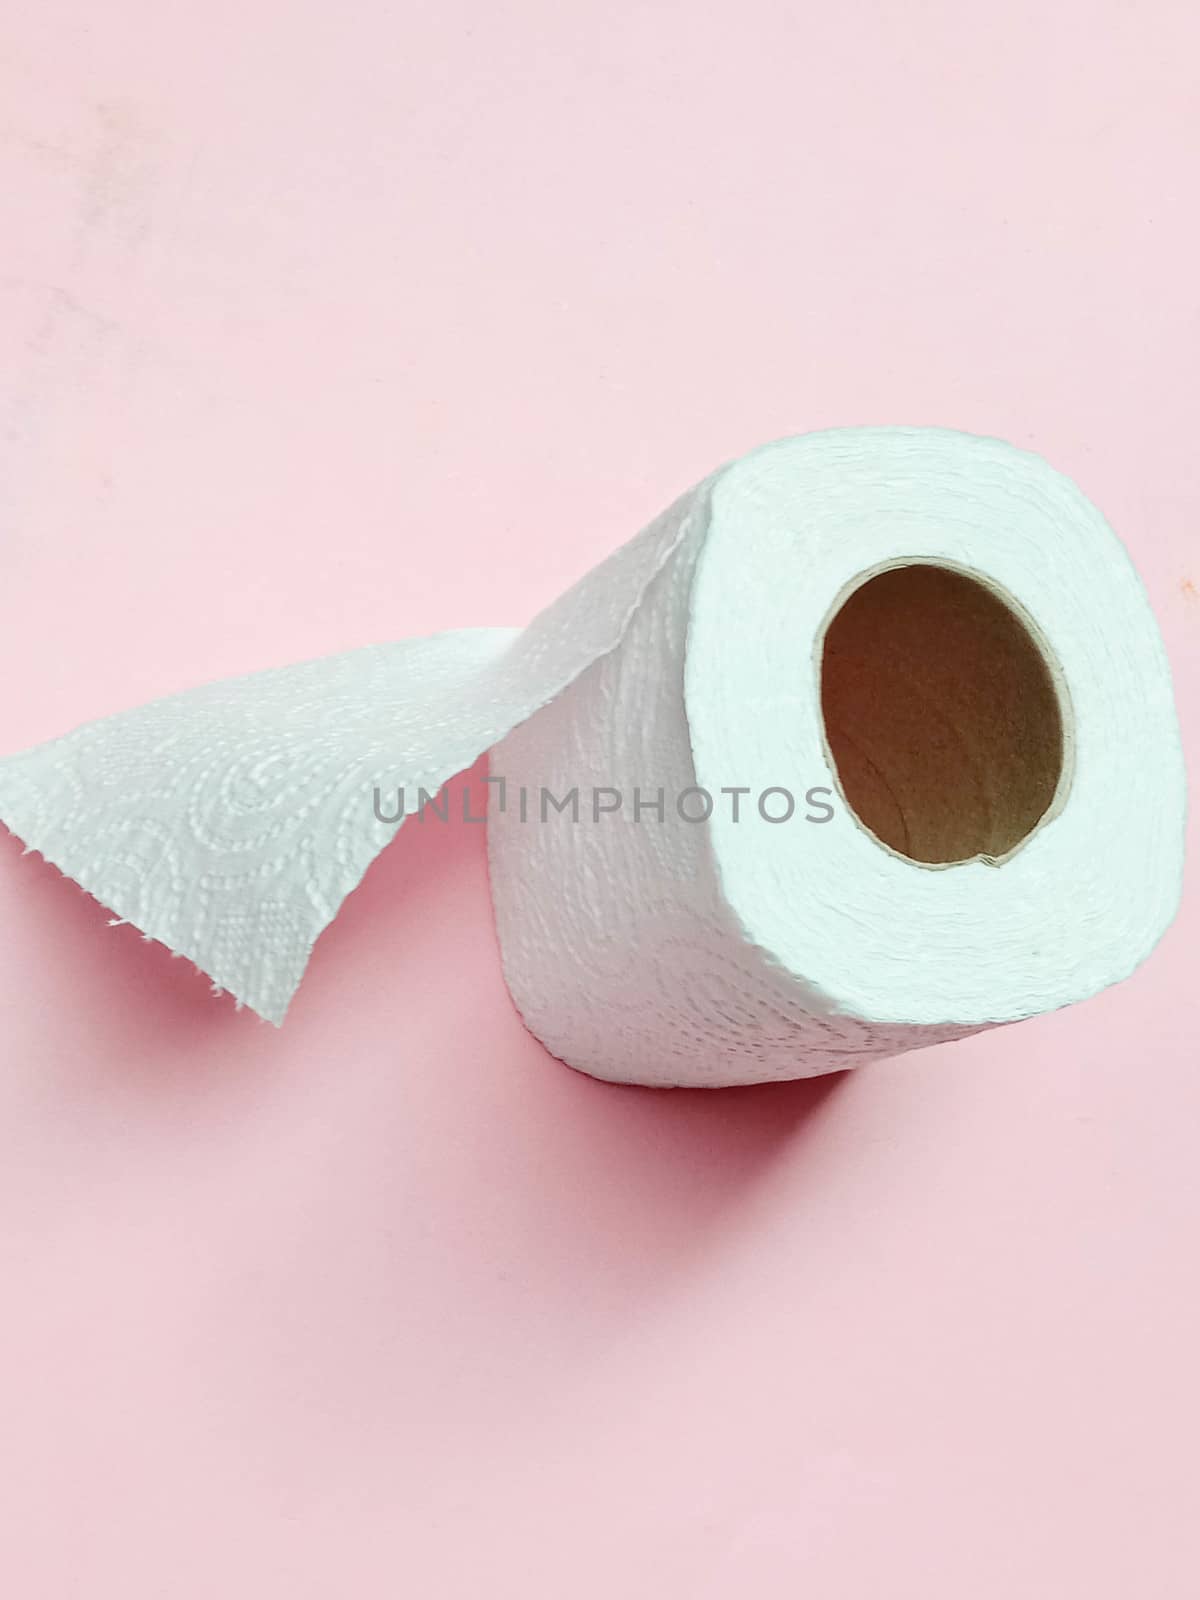 toilet paper tissue closeup on pink by jahidul2358